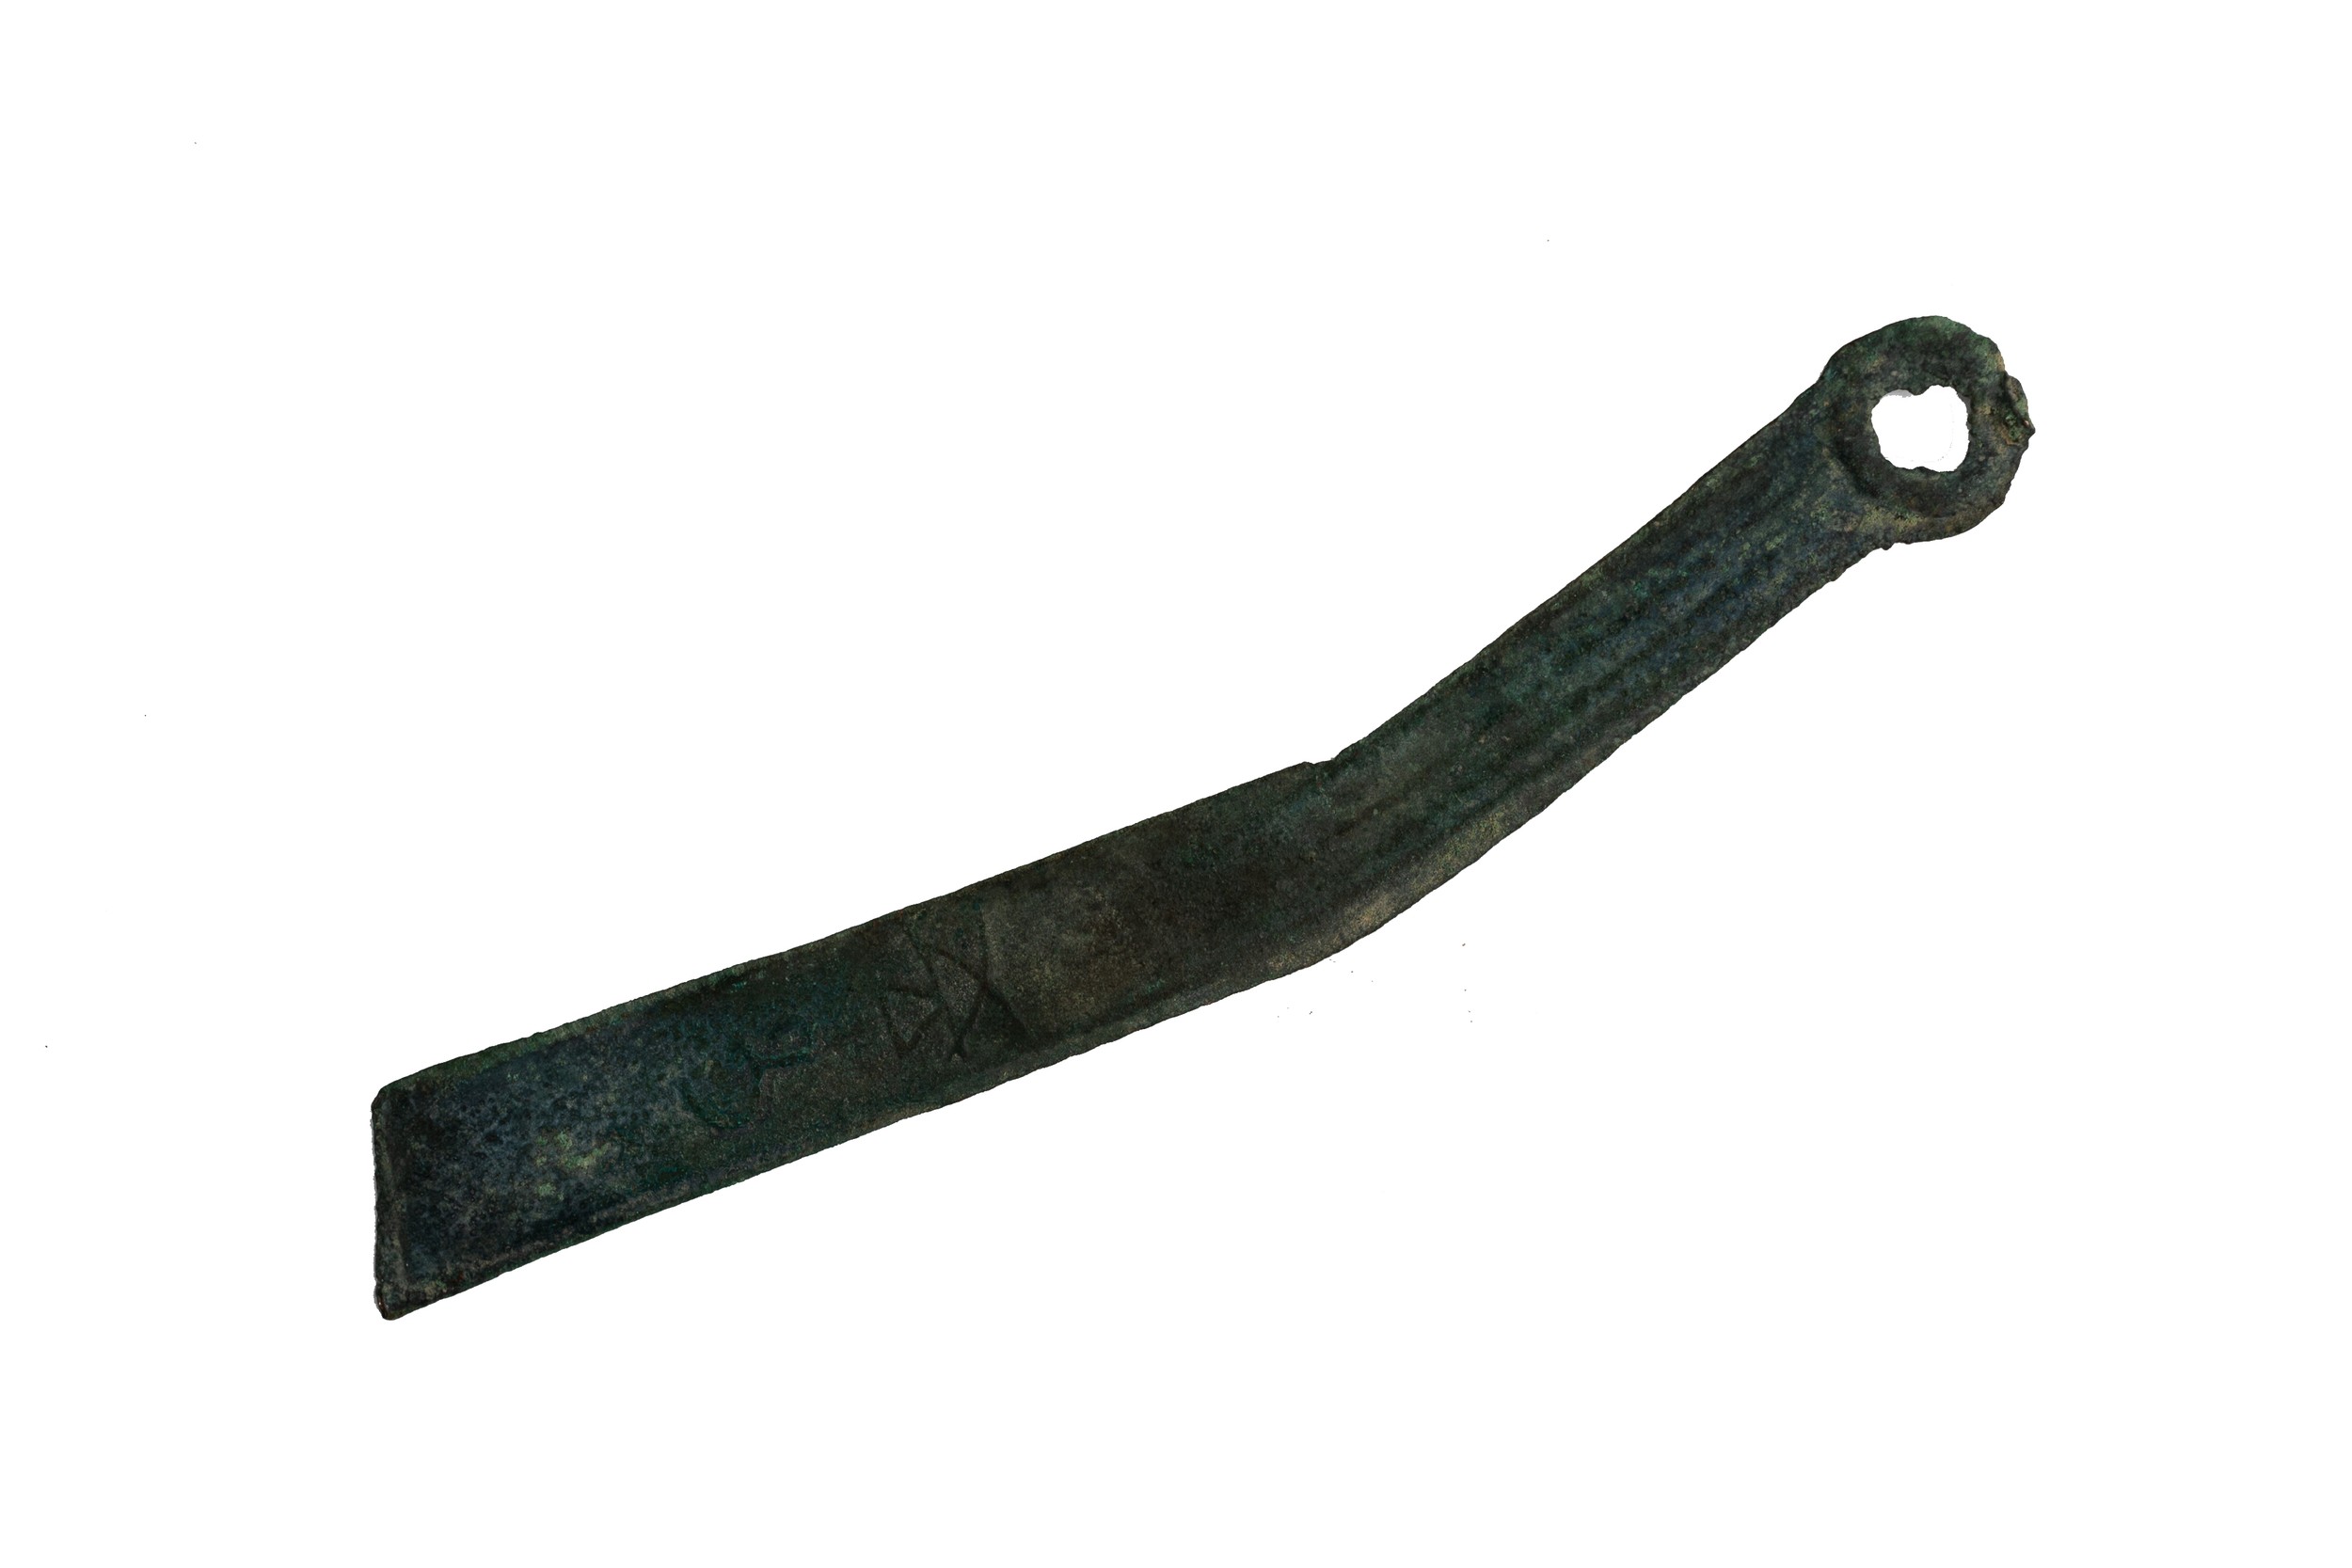 A CHINESE MING KNIFE COIN, WARRING STATES (400-220BC). 13.7cm length. Weight 13.8 grams. - Image 2 of 3